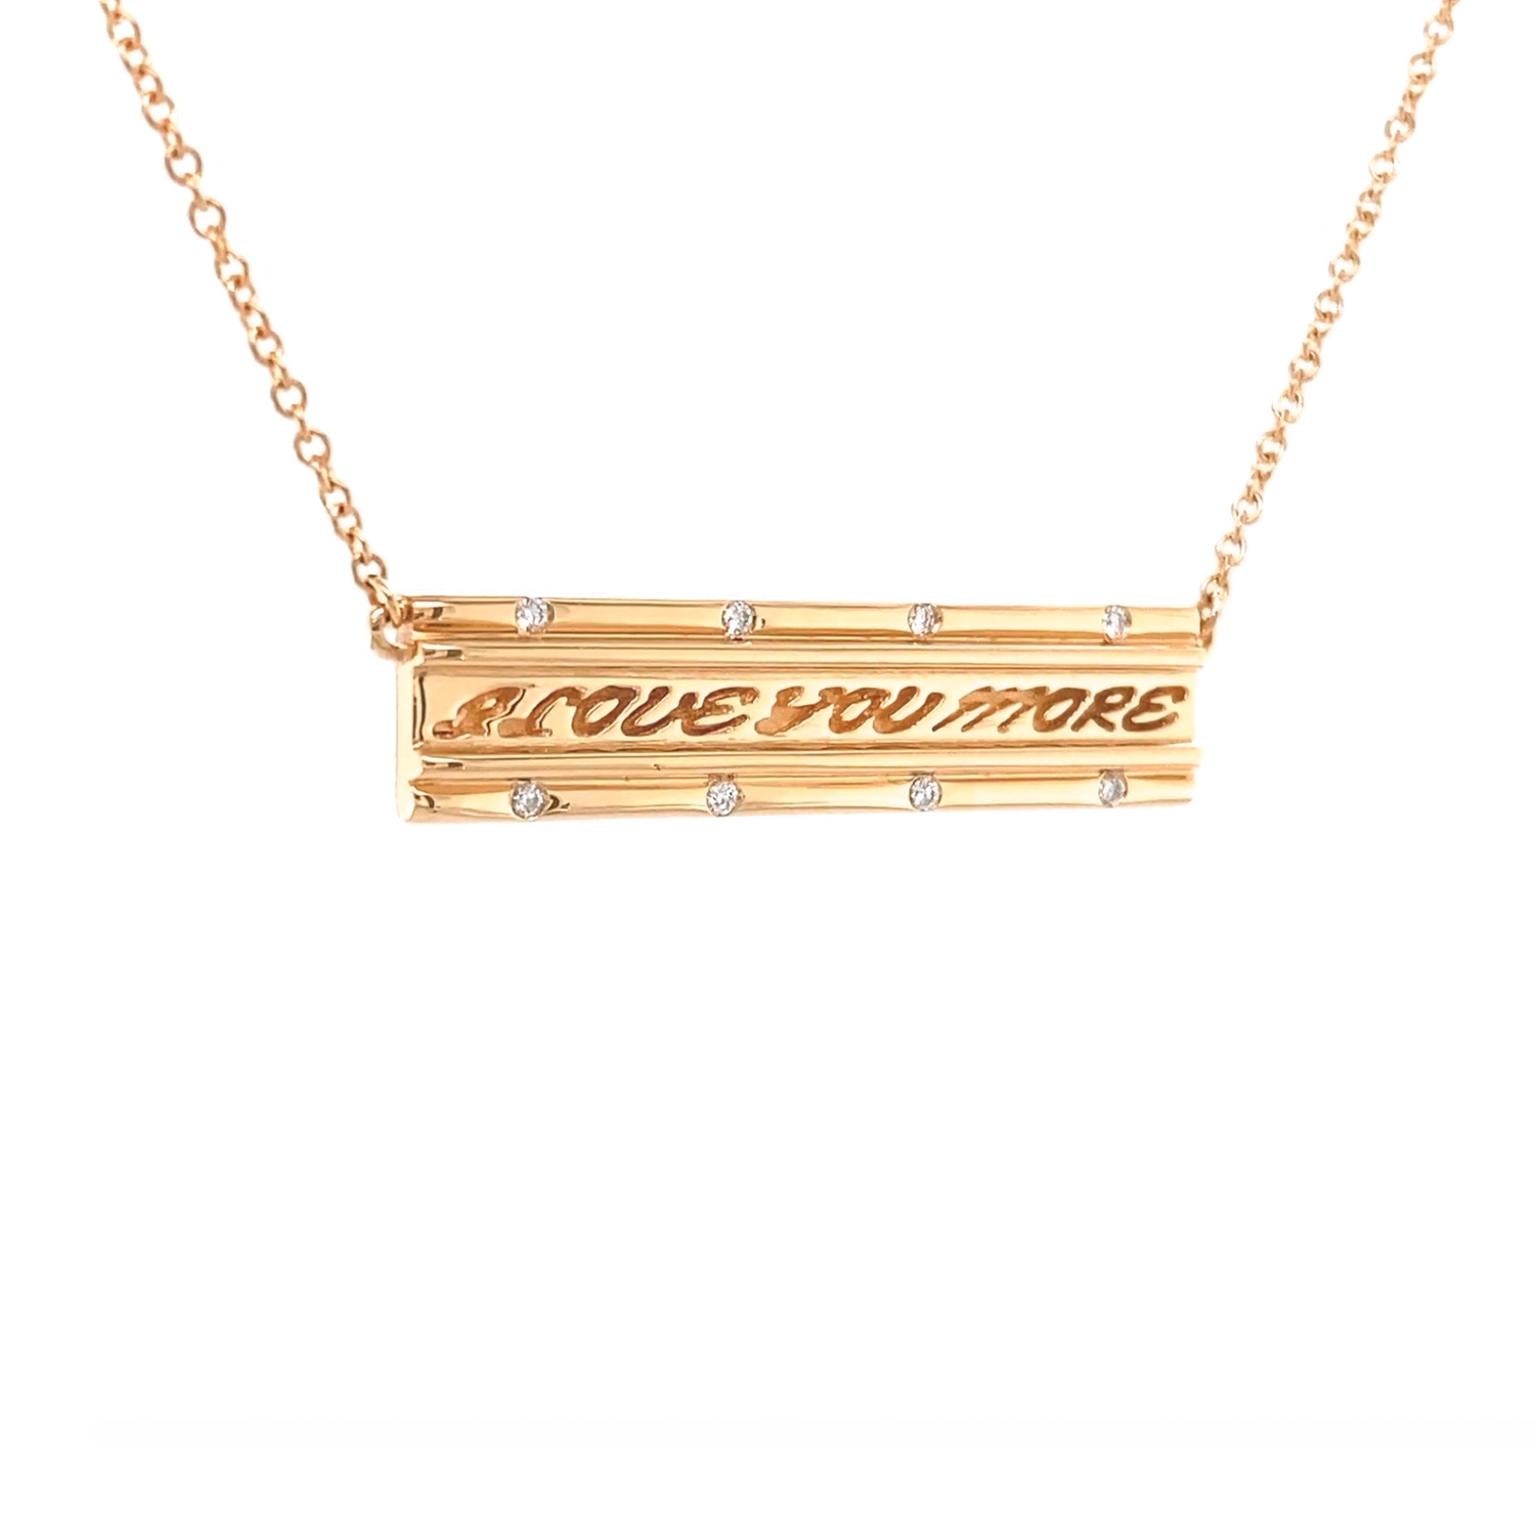 Valentin Magro I Love You More Diamond Rose Gold Bar Pendant is adorned with jewels and romance. The 18k pink gold base is shaped into a bar. In the center are the engraved words 'I love you more.' Smooth wires embedded along the sides frame the